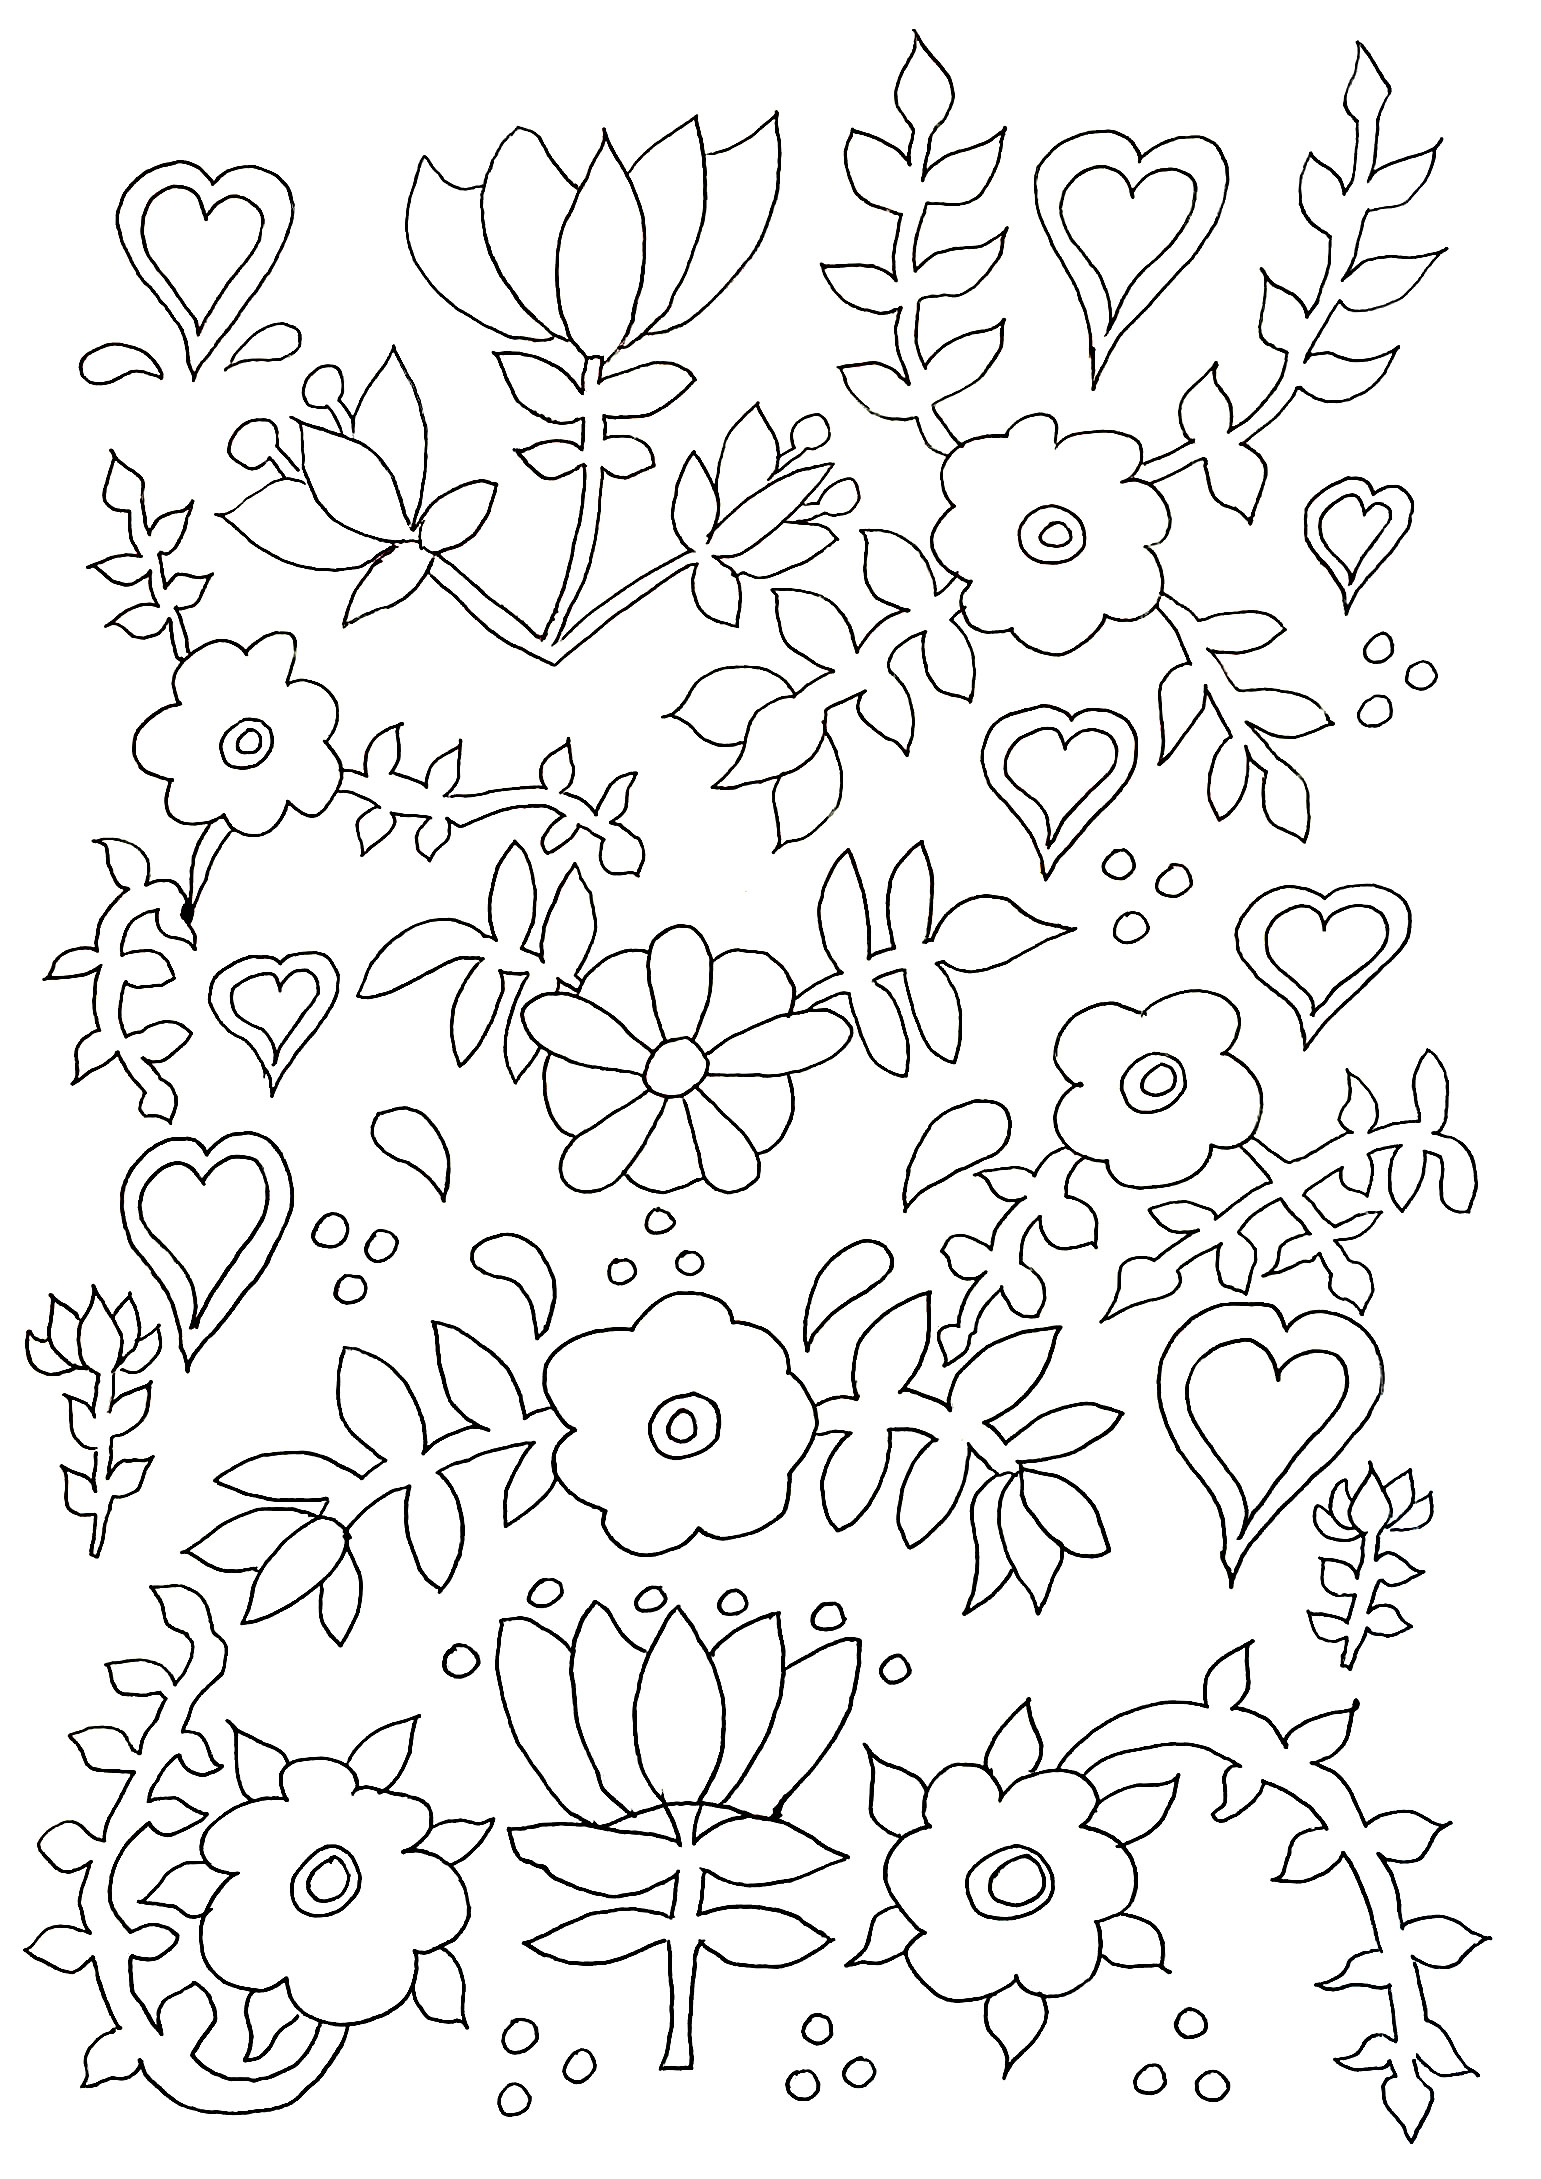 Flower drawing to download and print for children